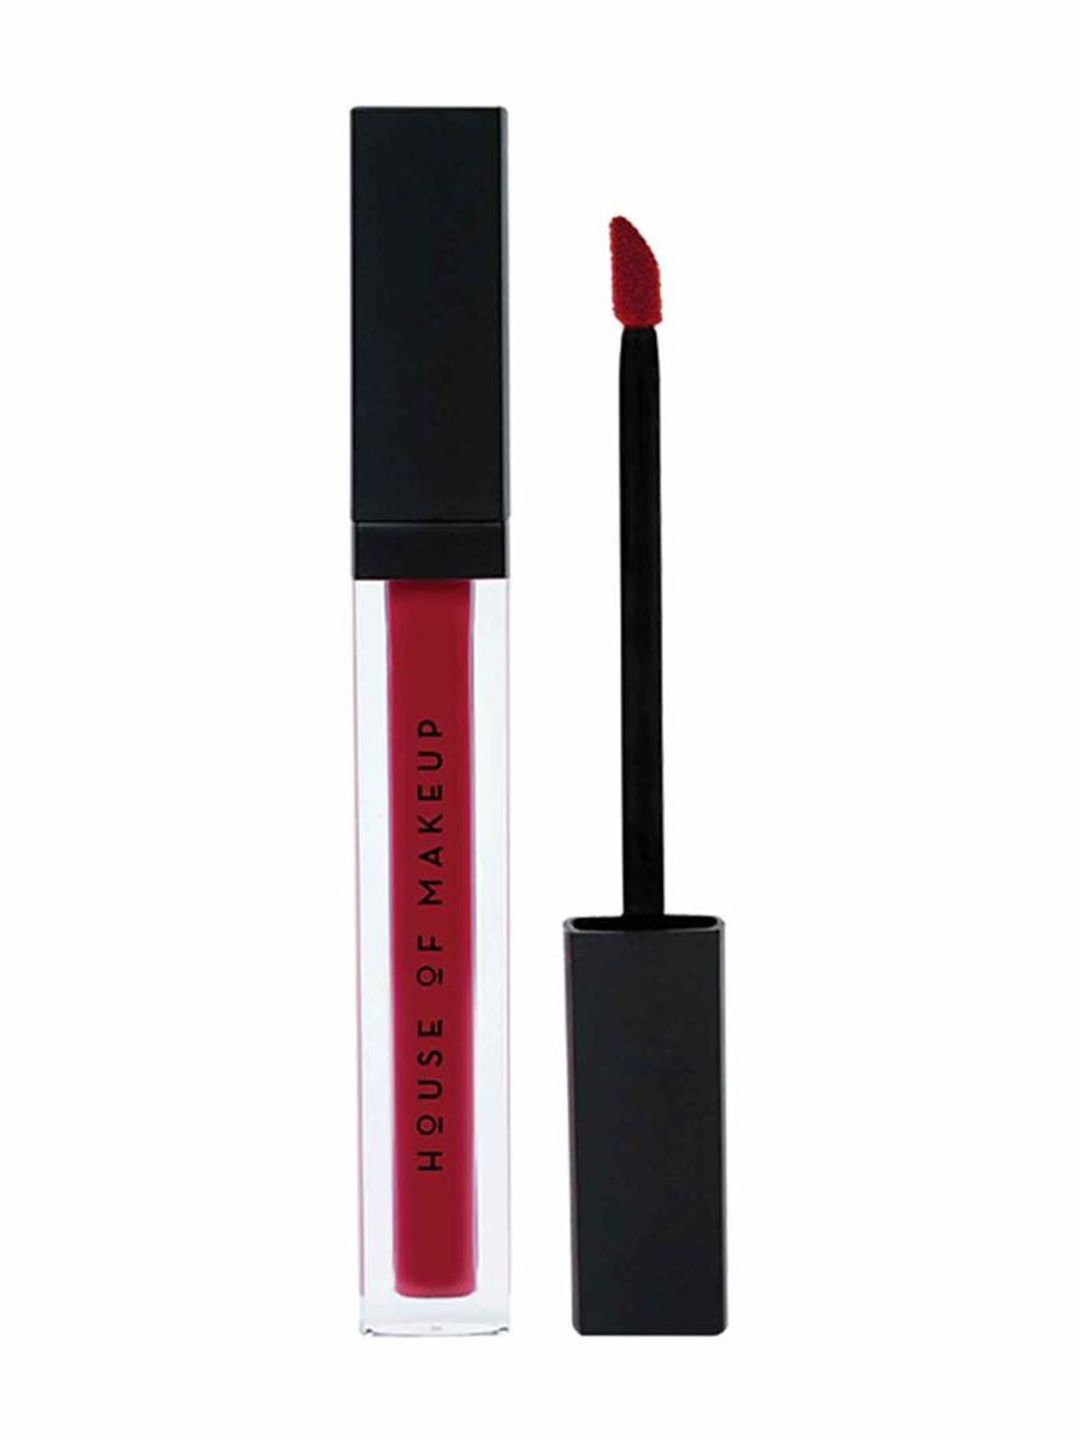 HOUSE OF MAKEUP Pout Potion Liquid Matte Lipstick-Drama Queen Price in India